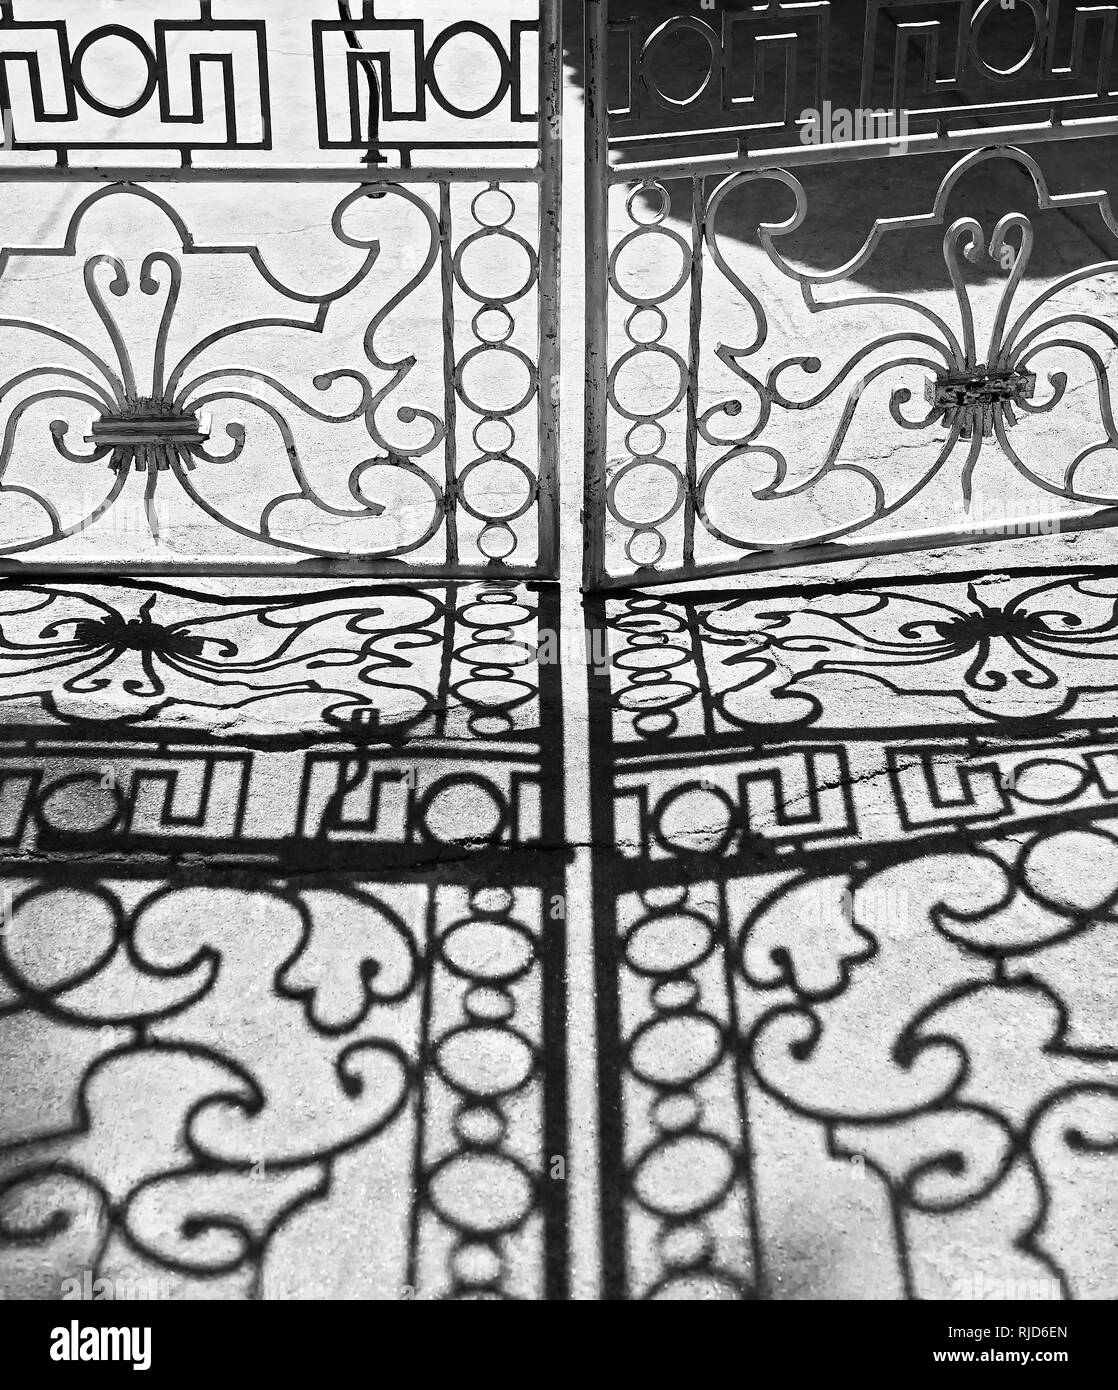 Closed iron crafted gate giving shadows on a grey floor, seen in Cuyo Town, Philippines. Photo is in black and white. Stock Photo